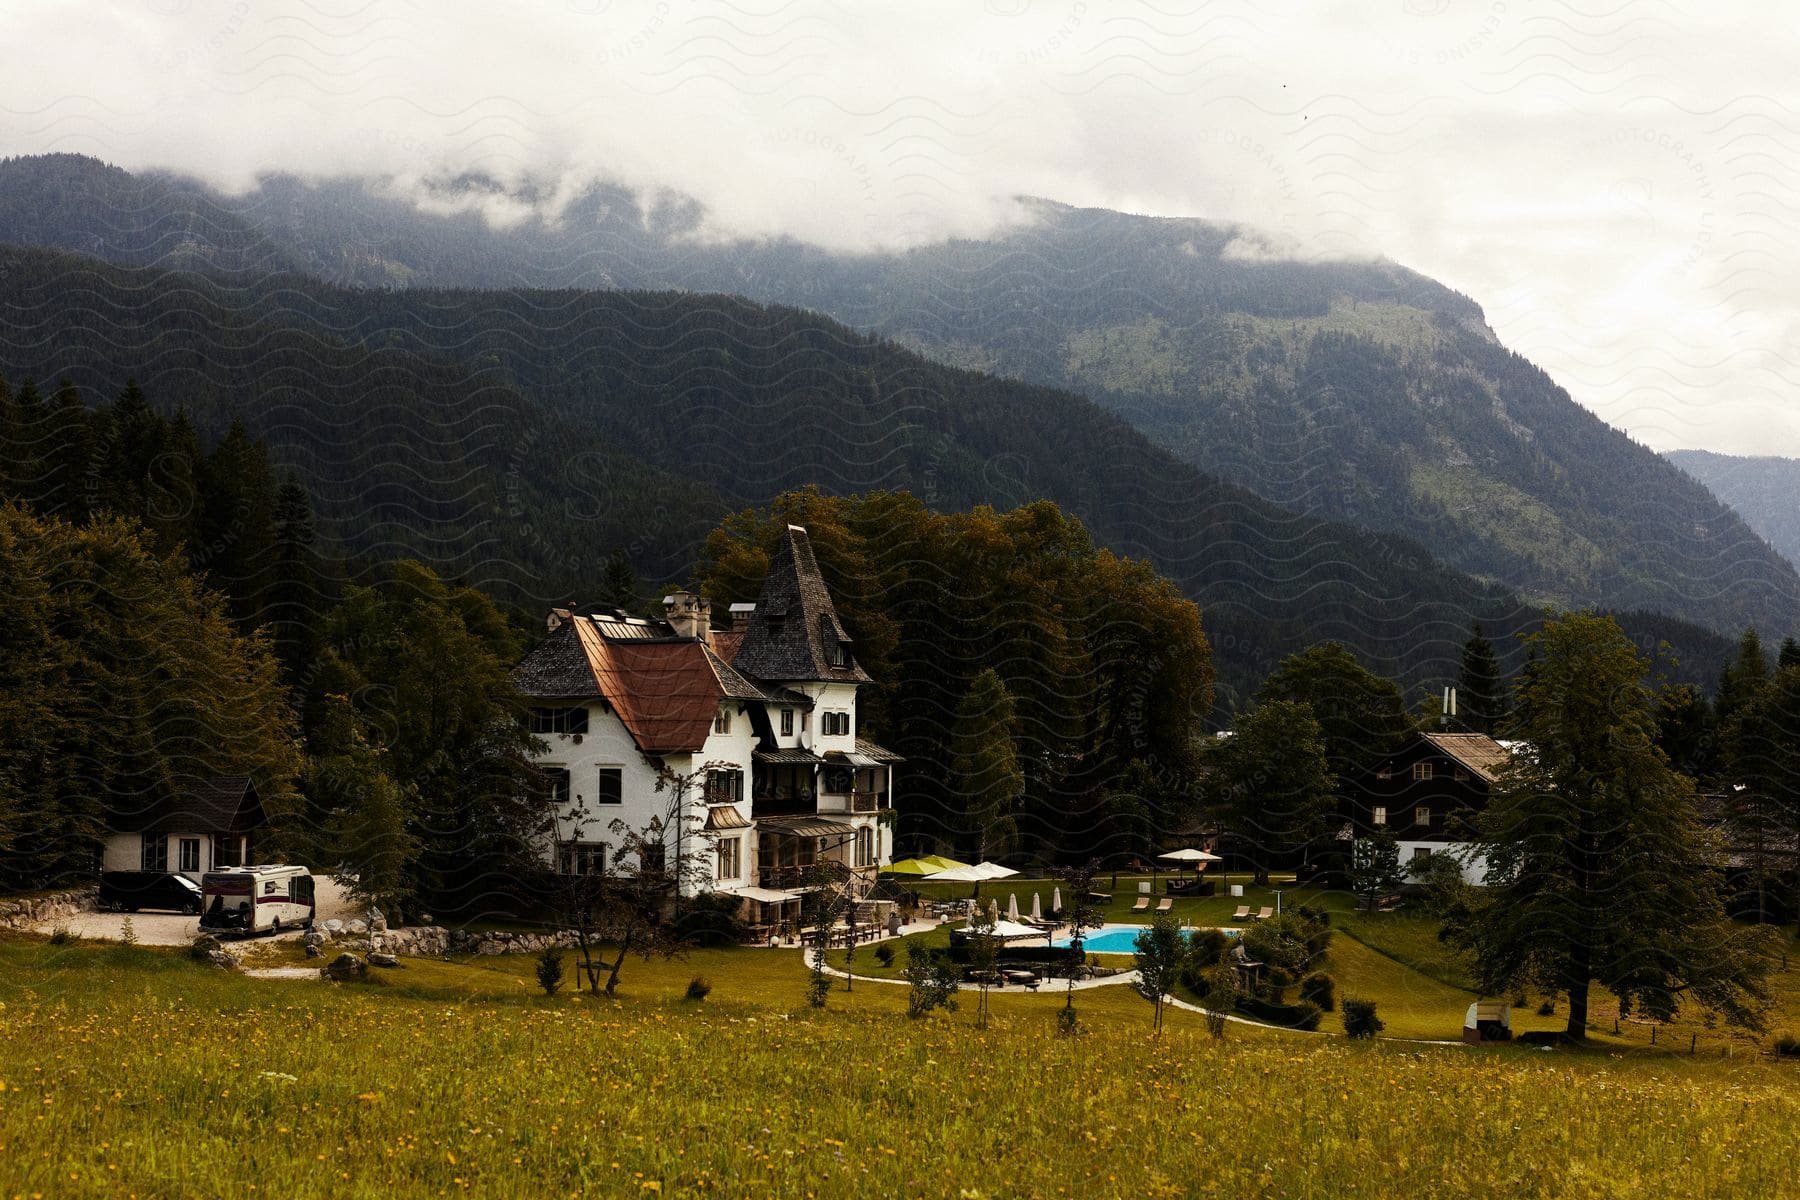 Houses in a small neighborhood at the foot of a forested mountain